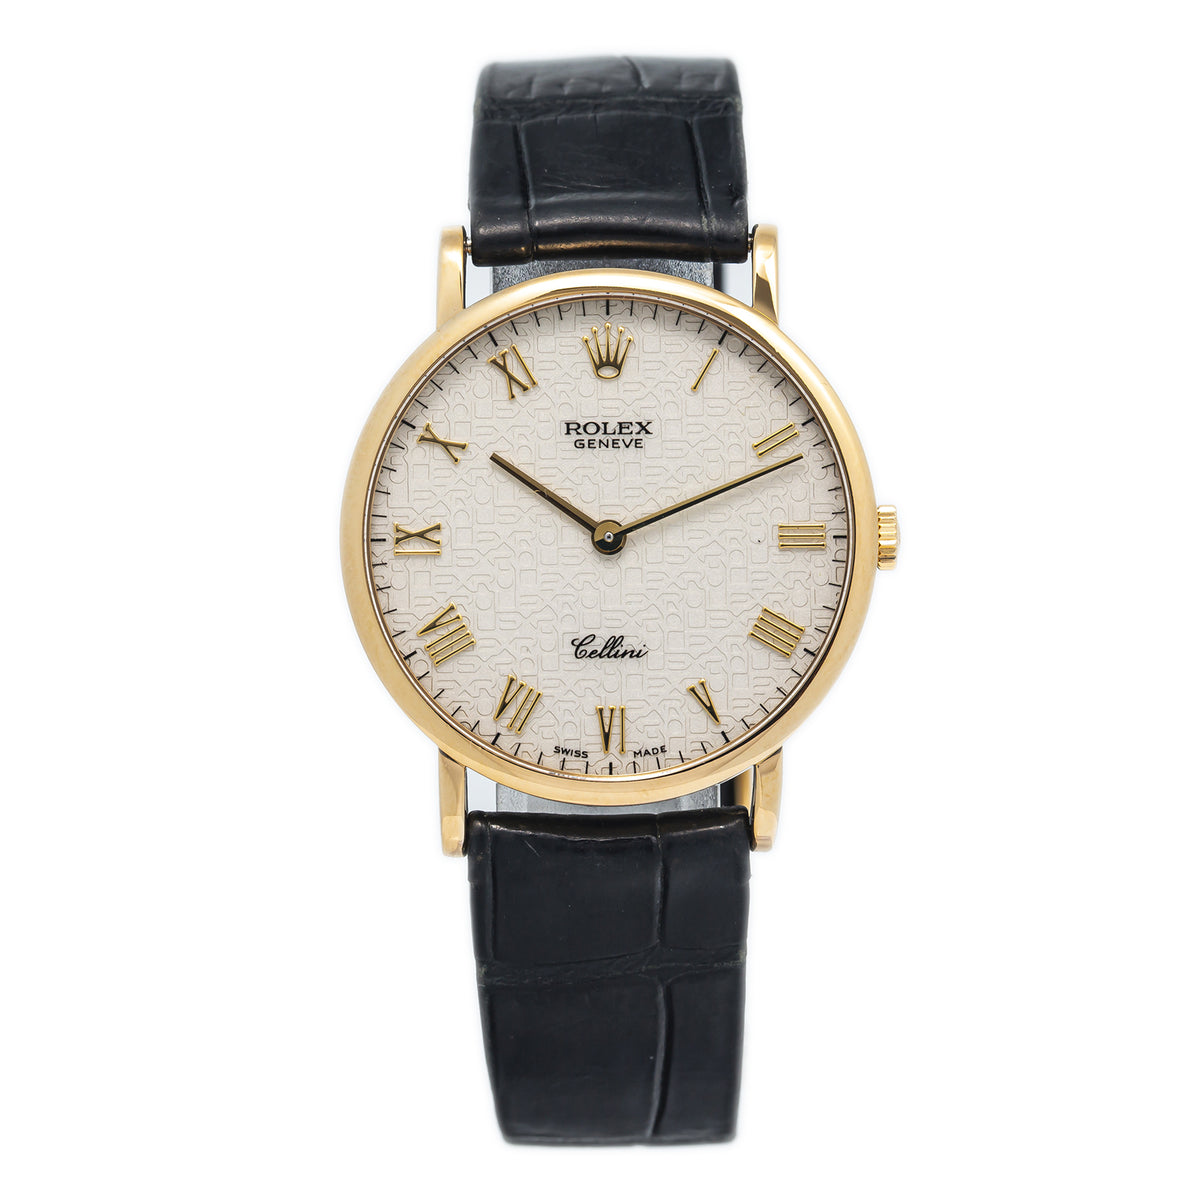 Rolex Cellini 5112 18k Yellow Gold White Dial Manual Hand Wind Watch 32mm